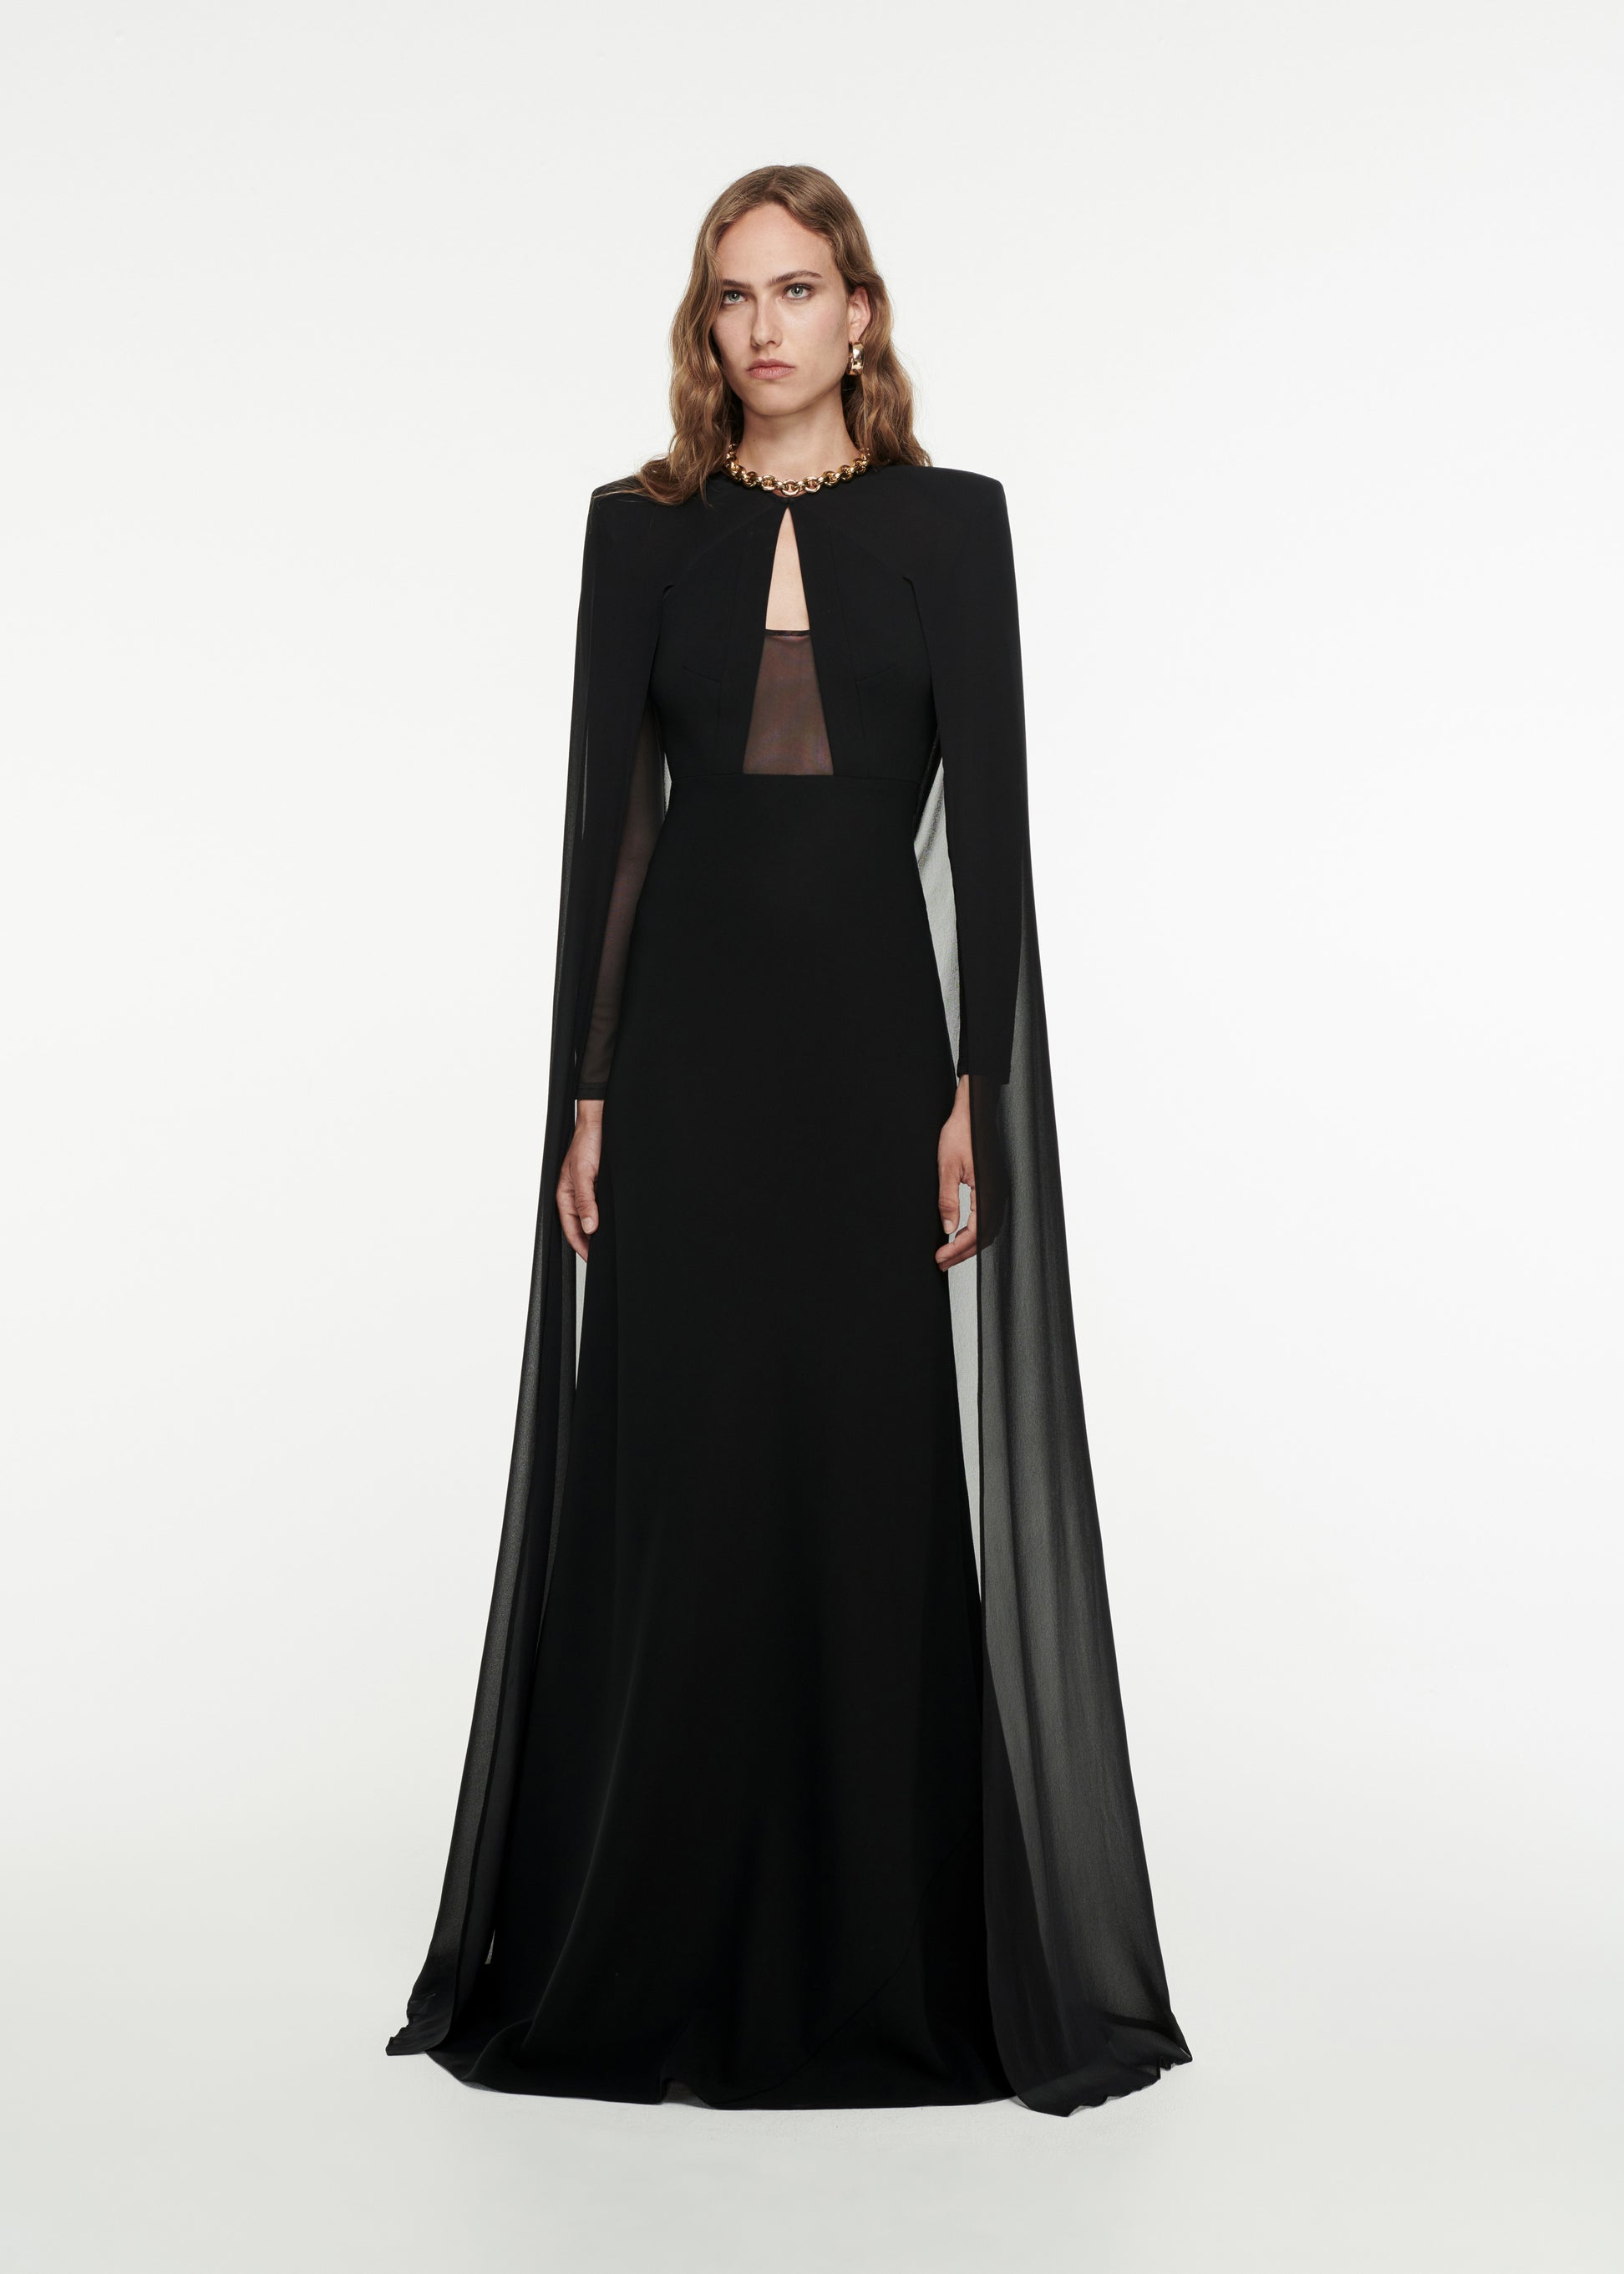 Woman wearing the Long Sleeve Cape Gown in Black